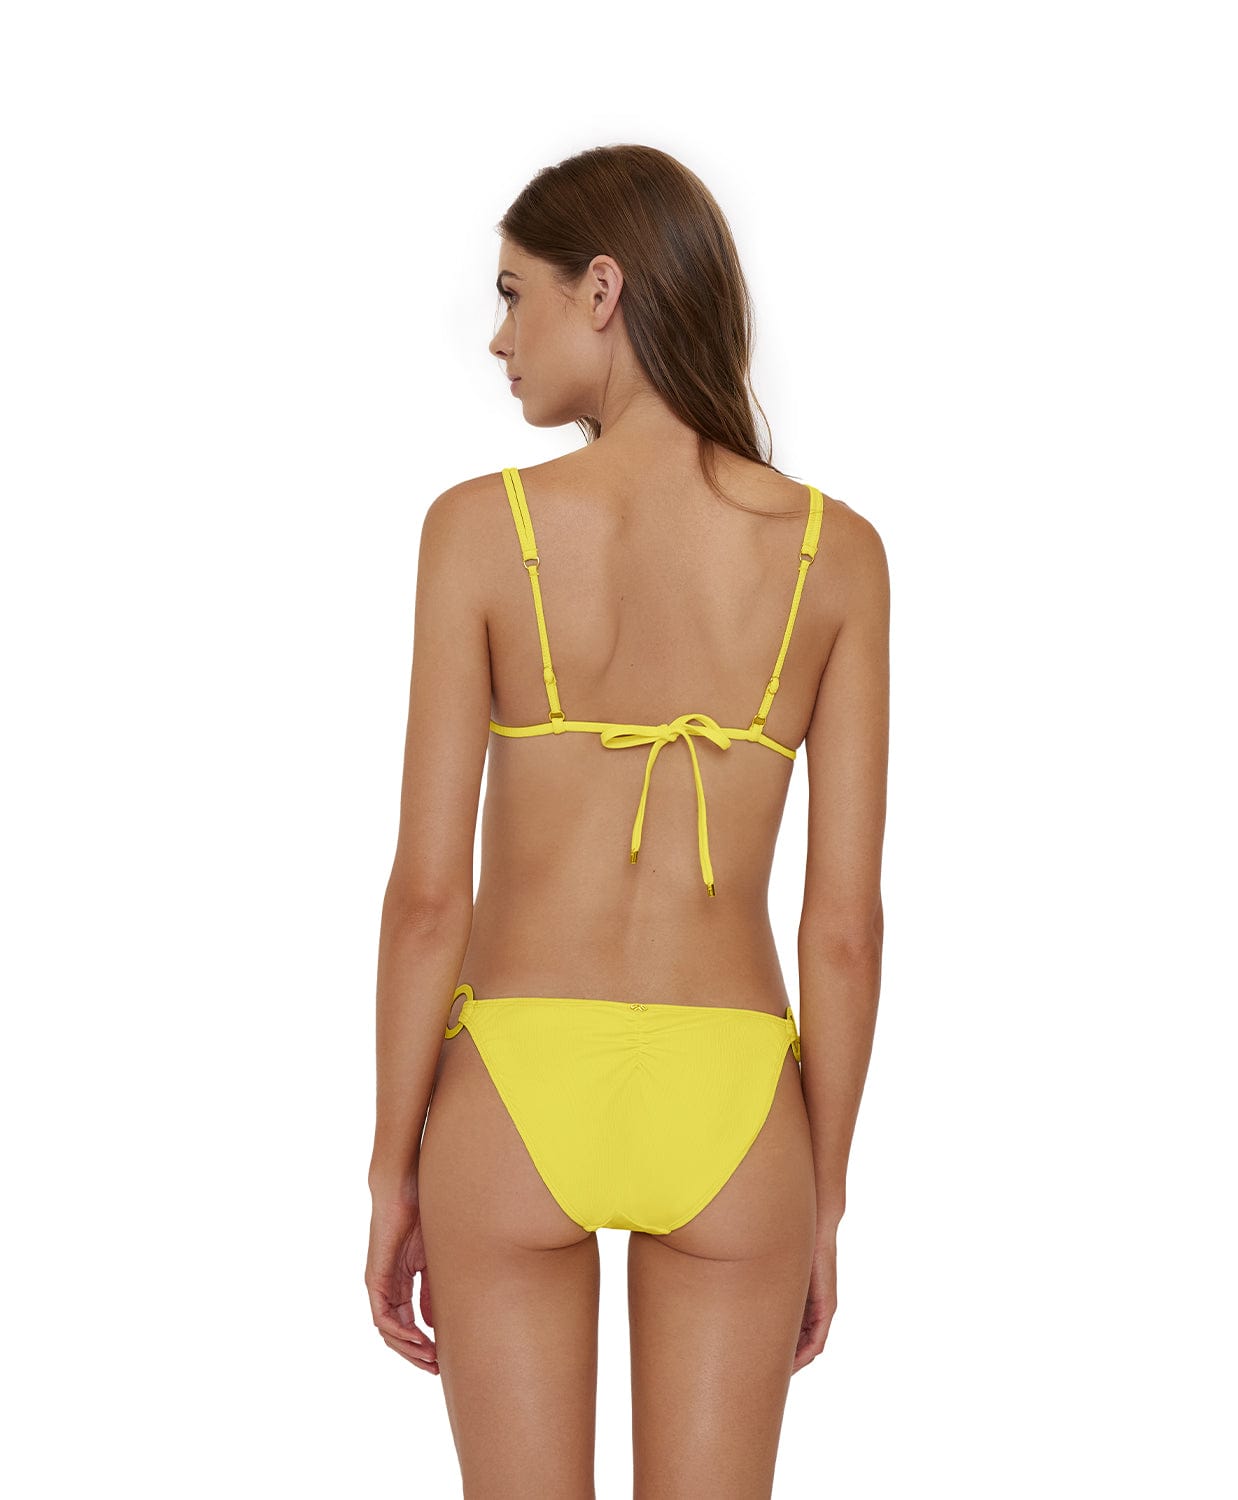 Lace Lingerie In Wear — YELLOW SUB TRADING